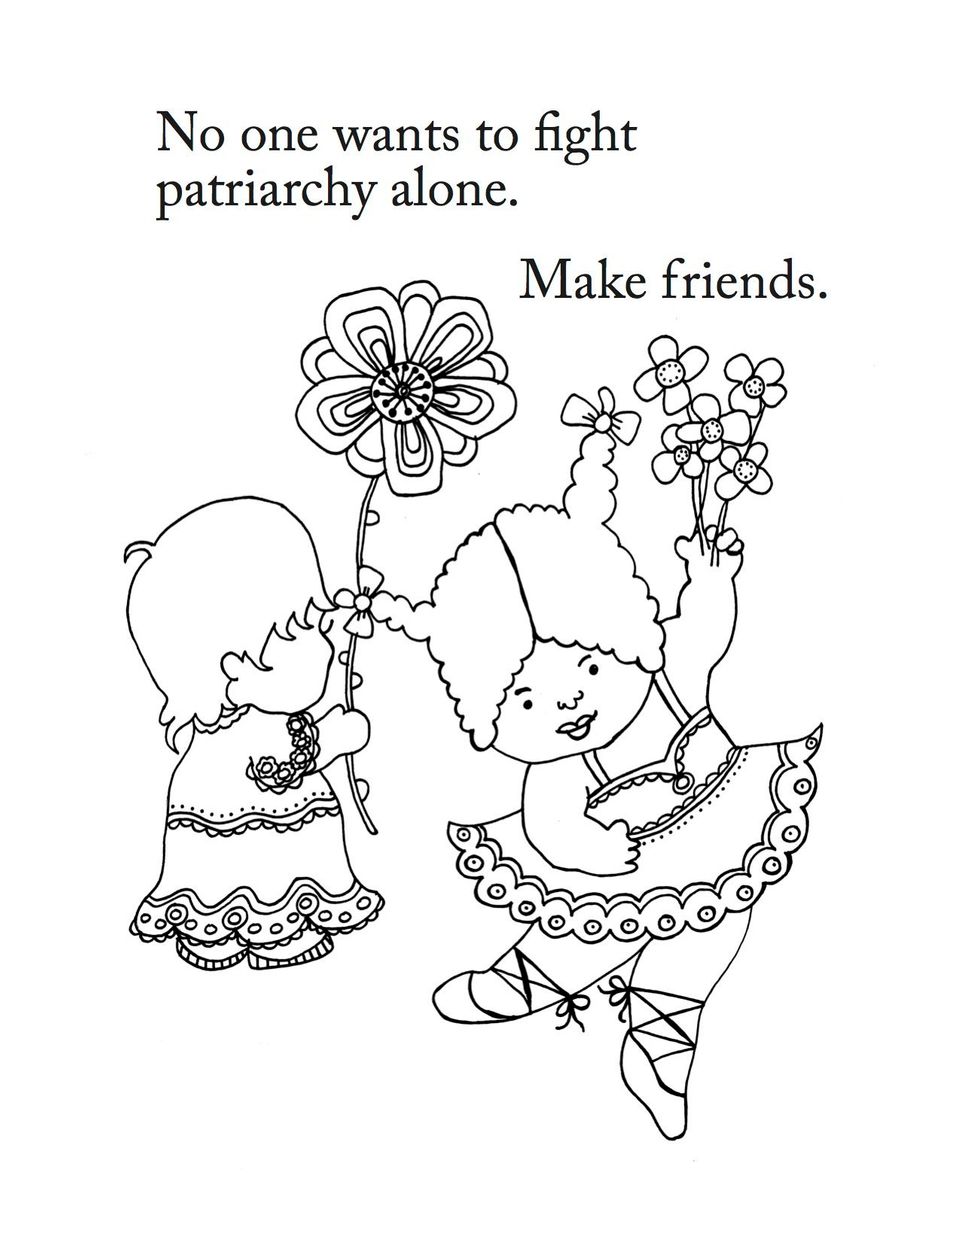 Rad Coloring Book Busts Gender Stereotypes With Awesome Images | HuffPost  Life